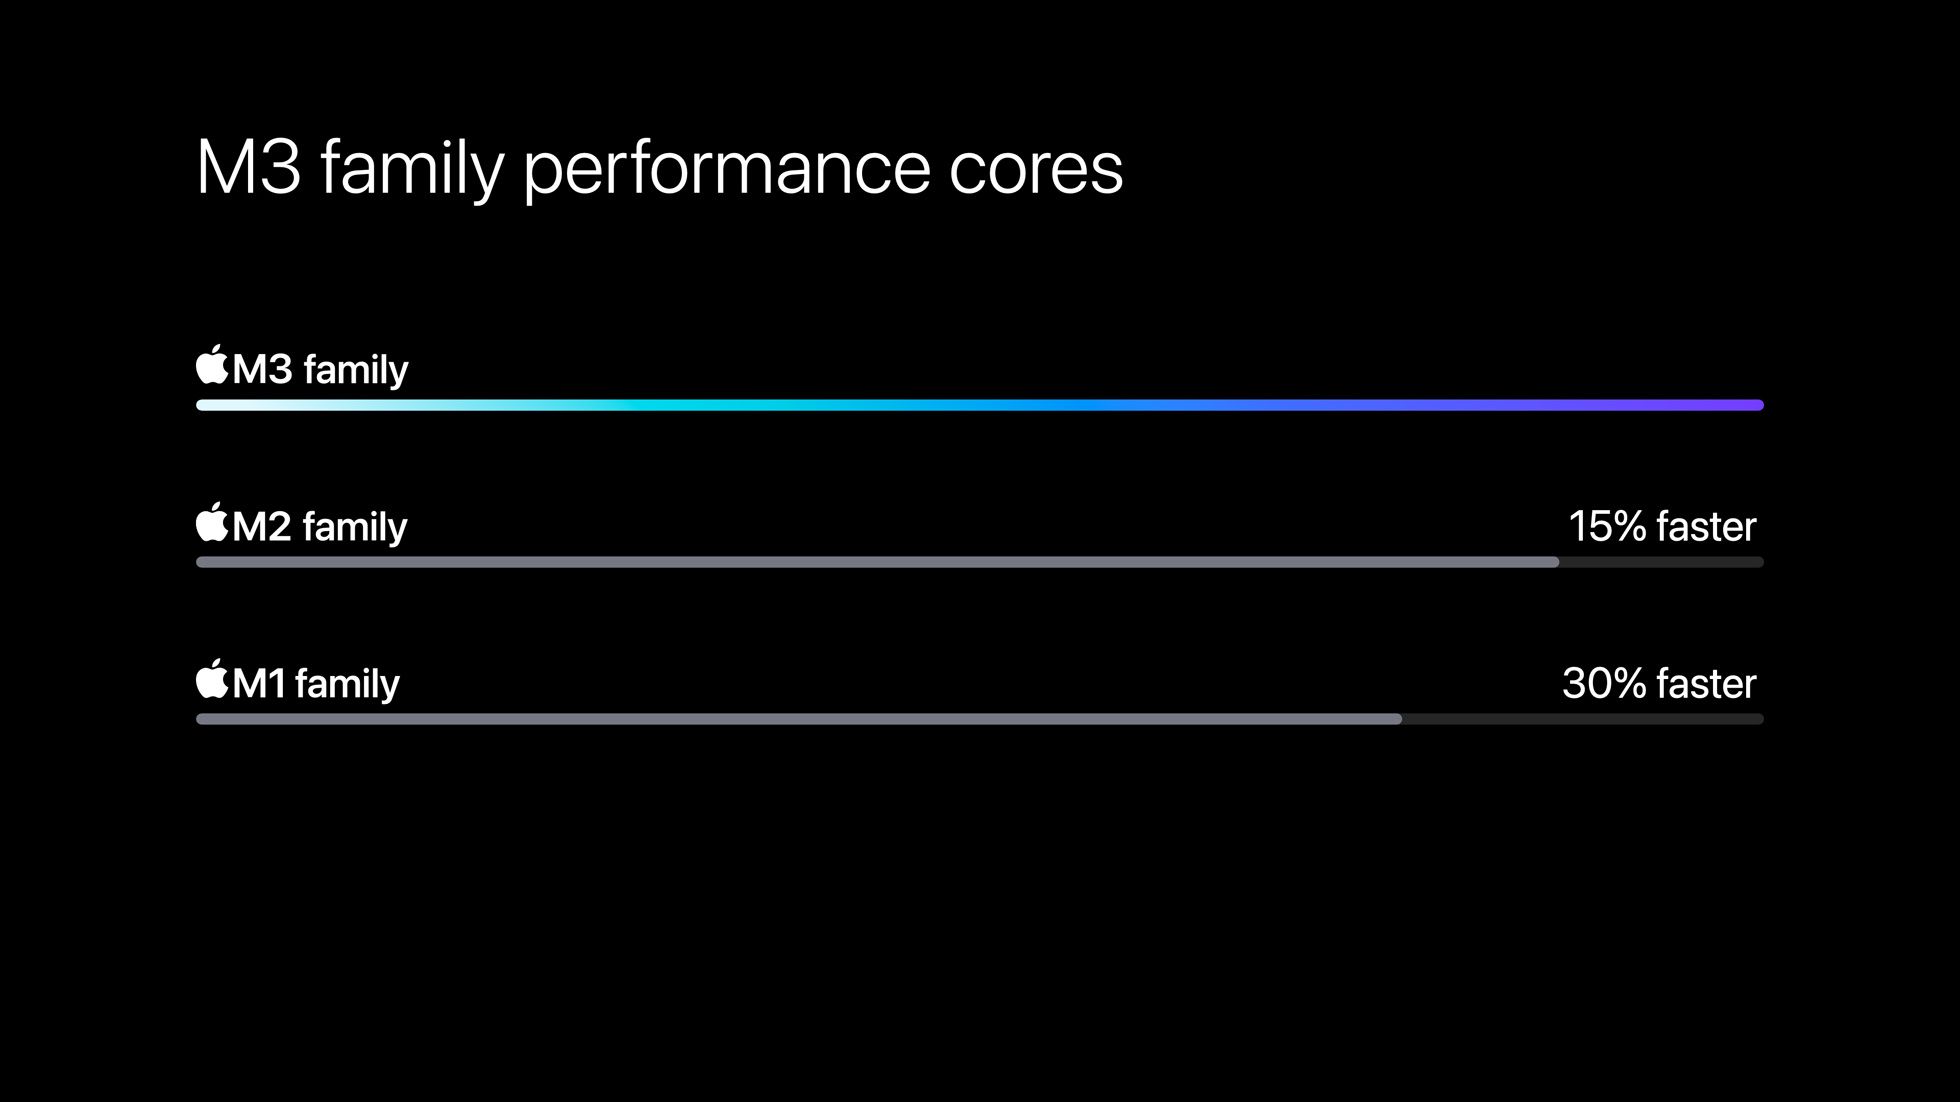 Graph showing M3 performance cores as 15% faster than M2 and 30% faster than M1